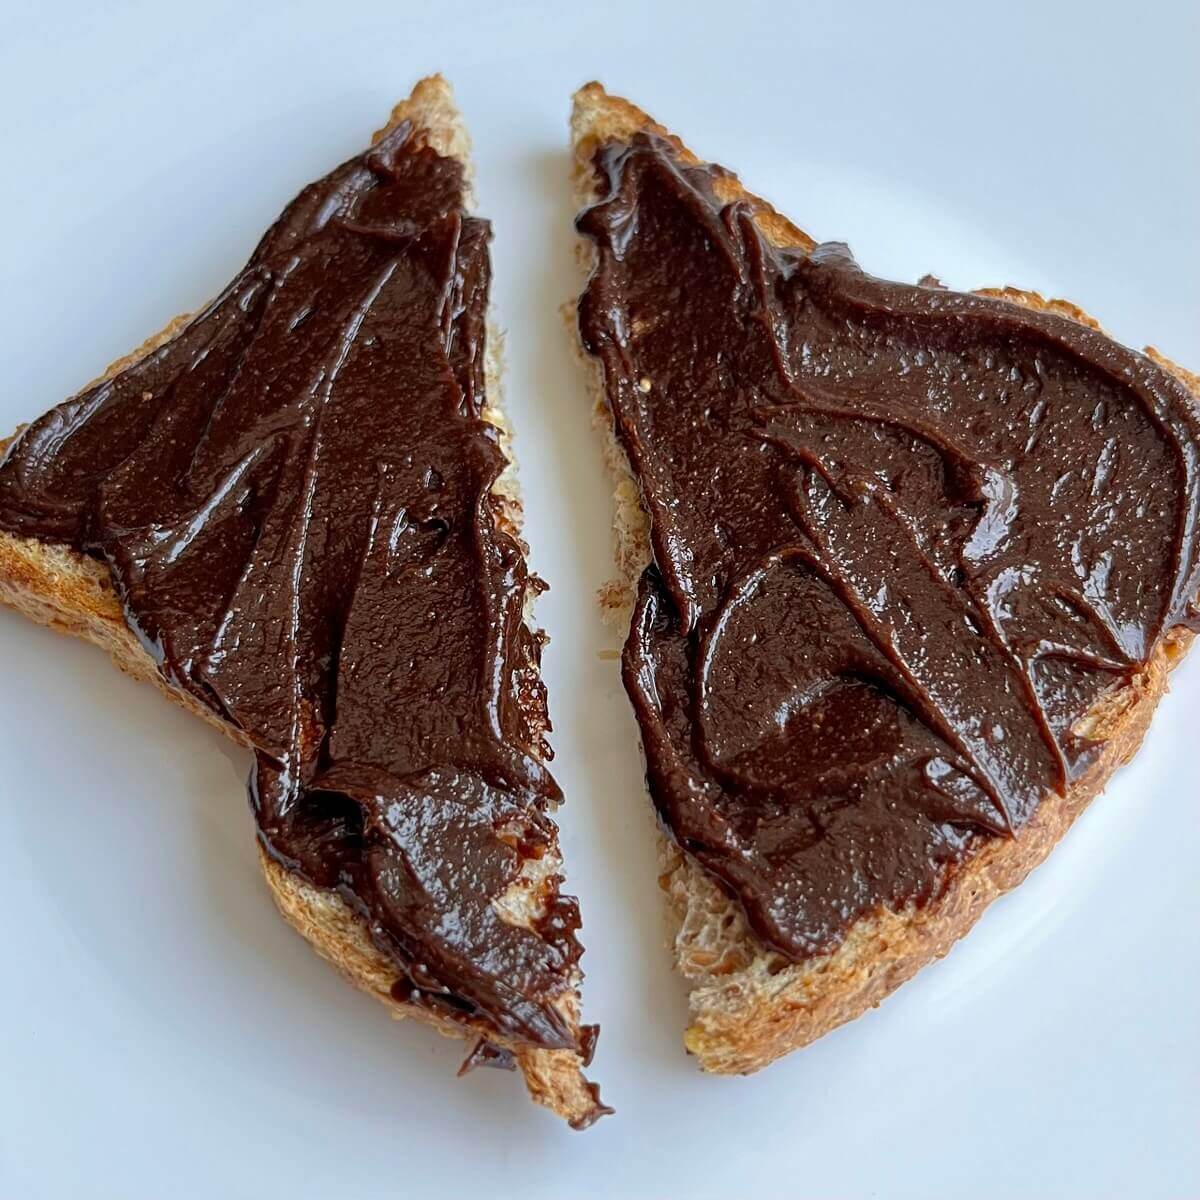 Toast with carob spread on a white plate.